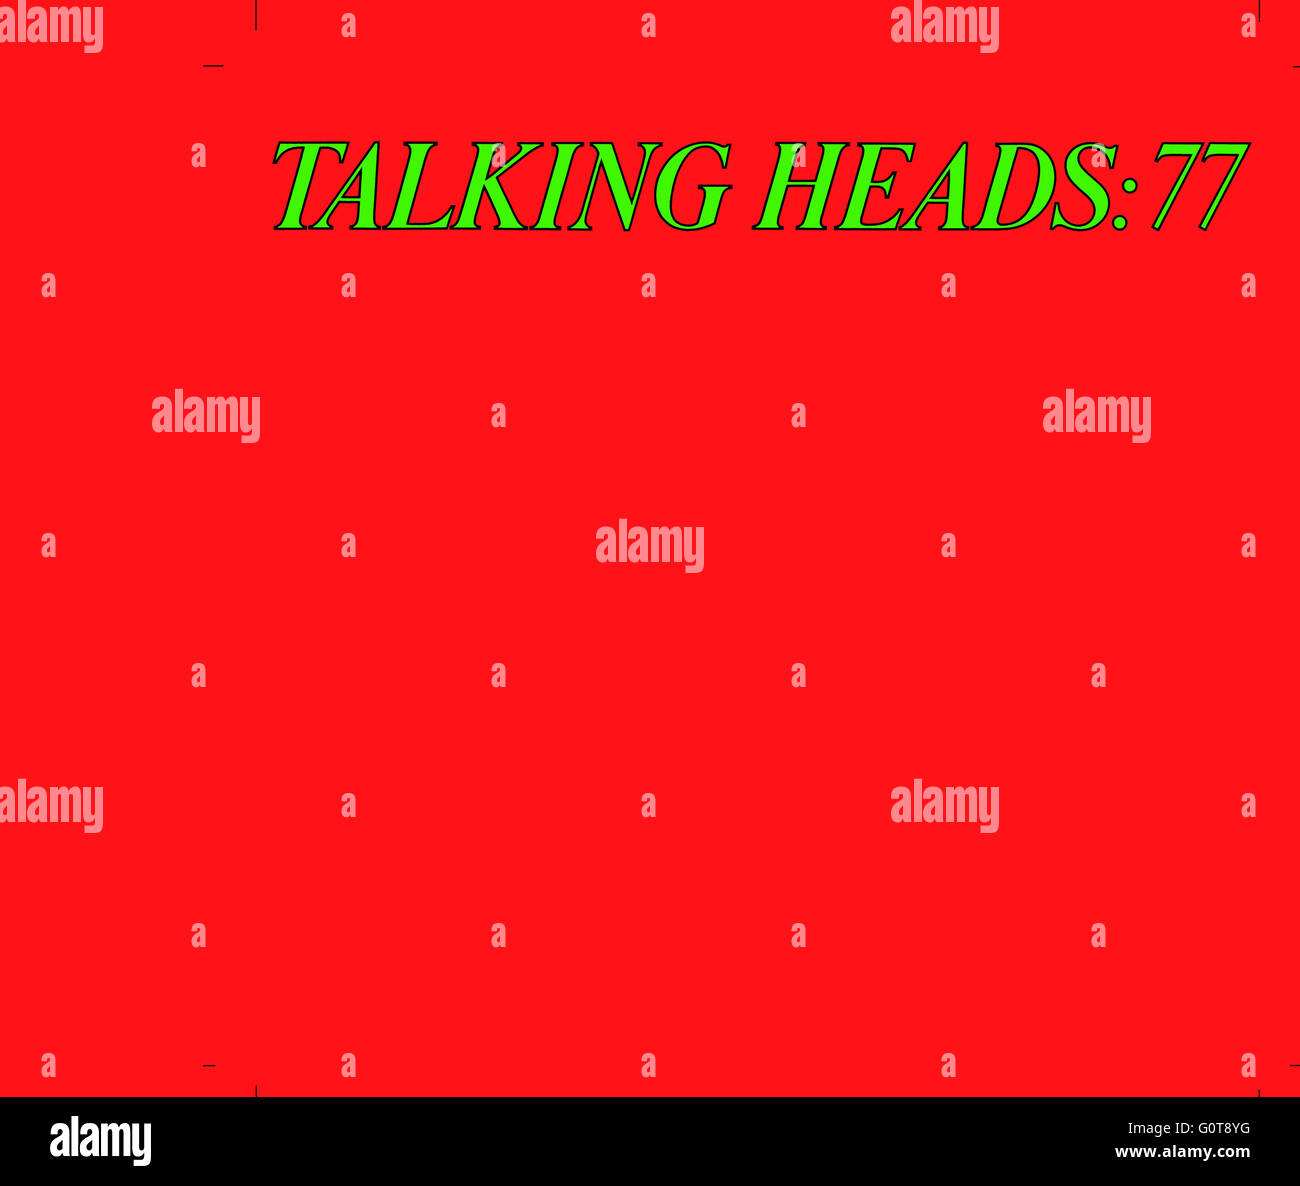 Cover des Albums Talking Heads' "Talking Heads: 77' Stockfoto